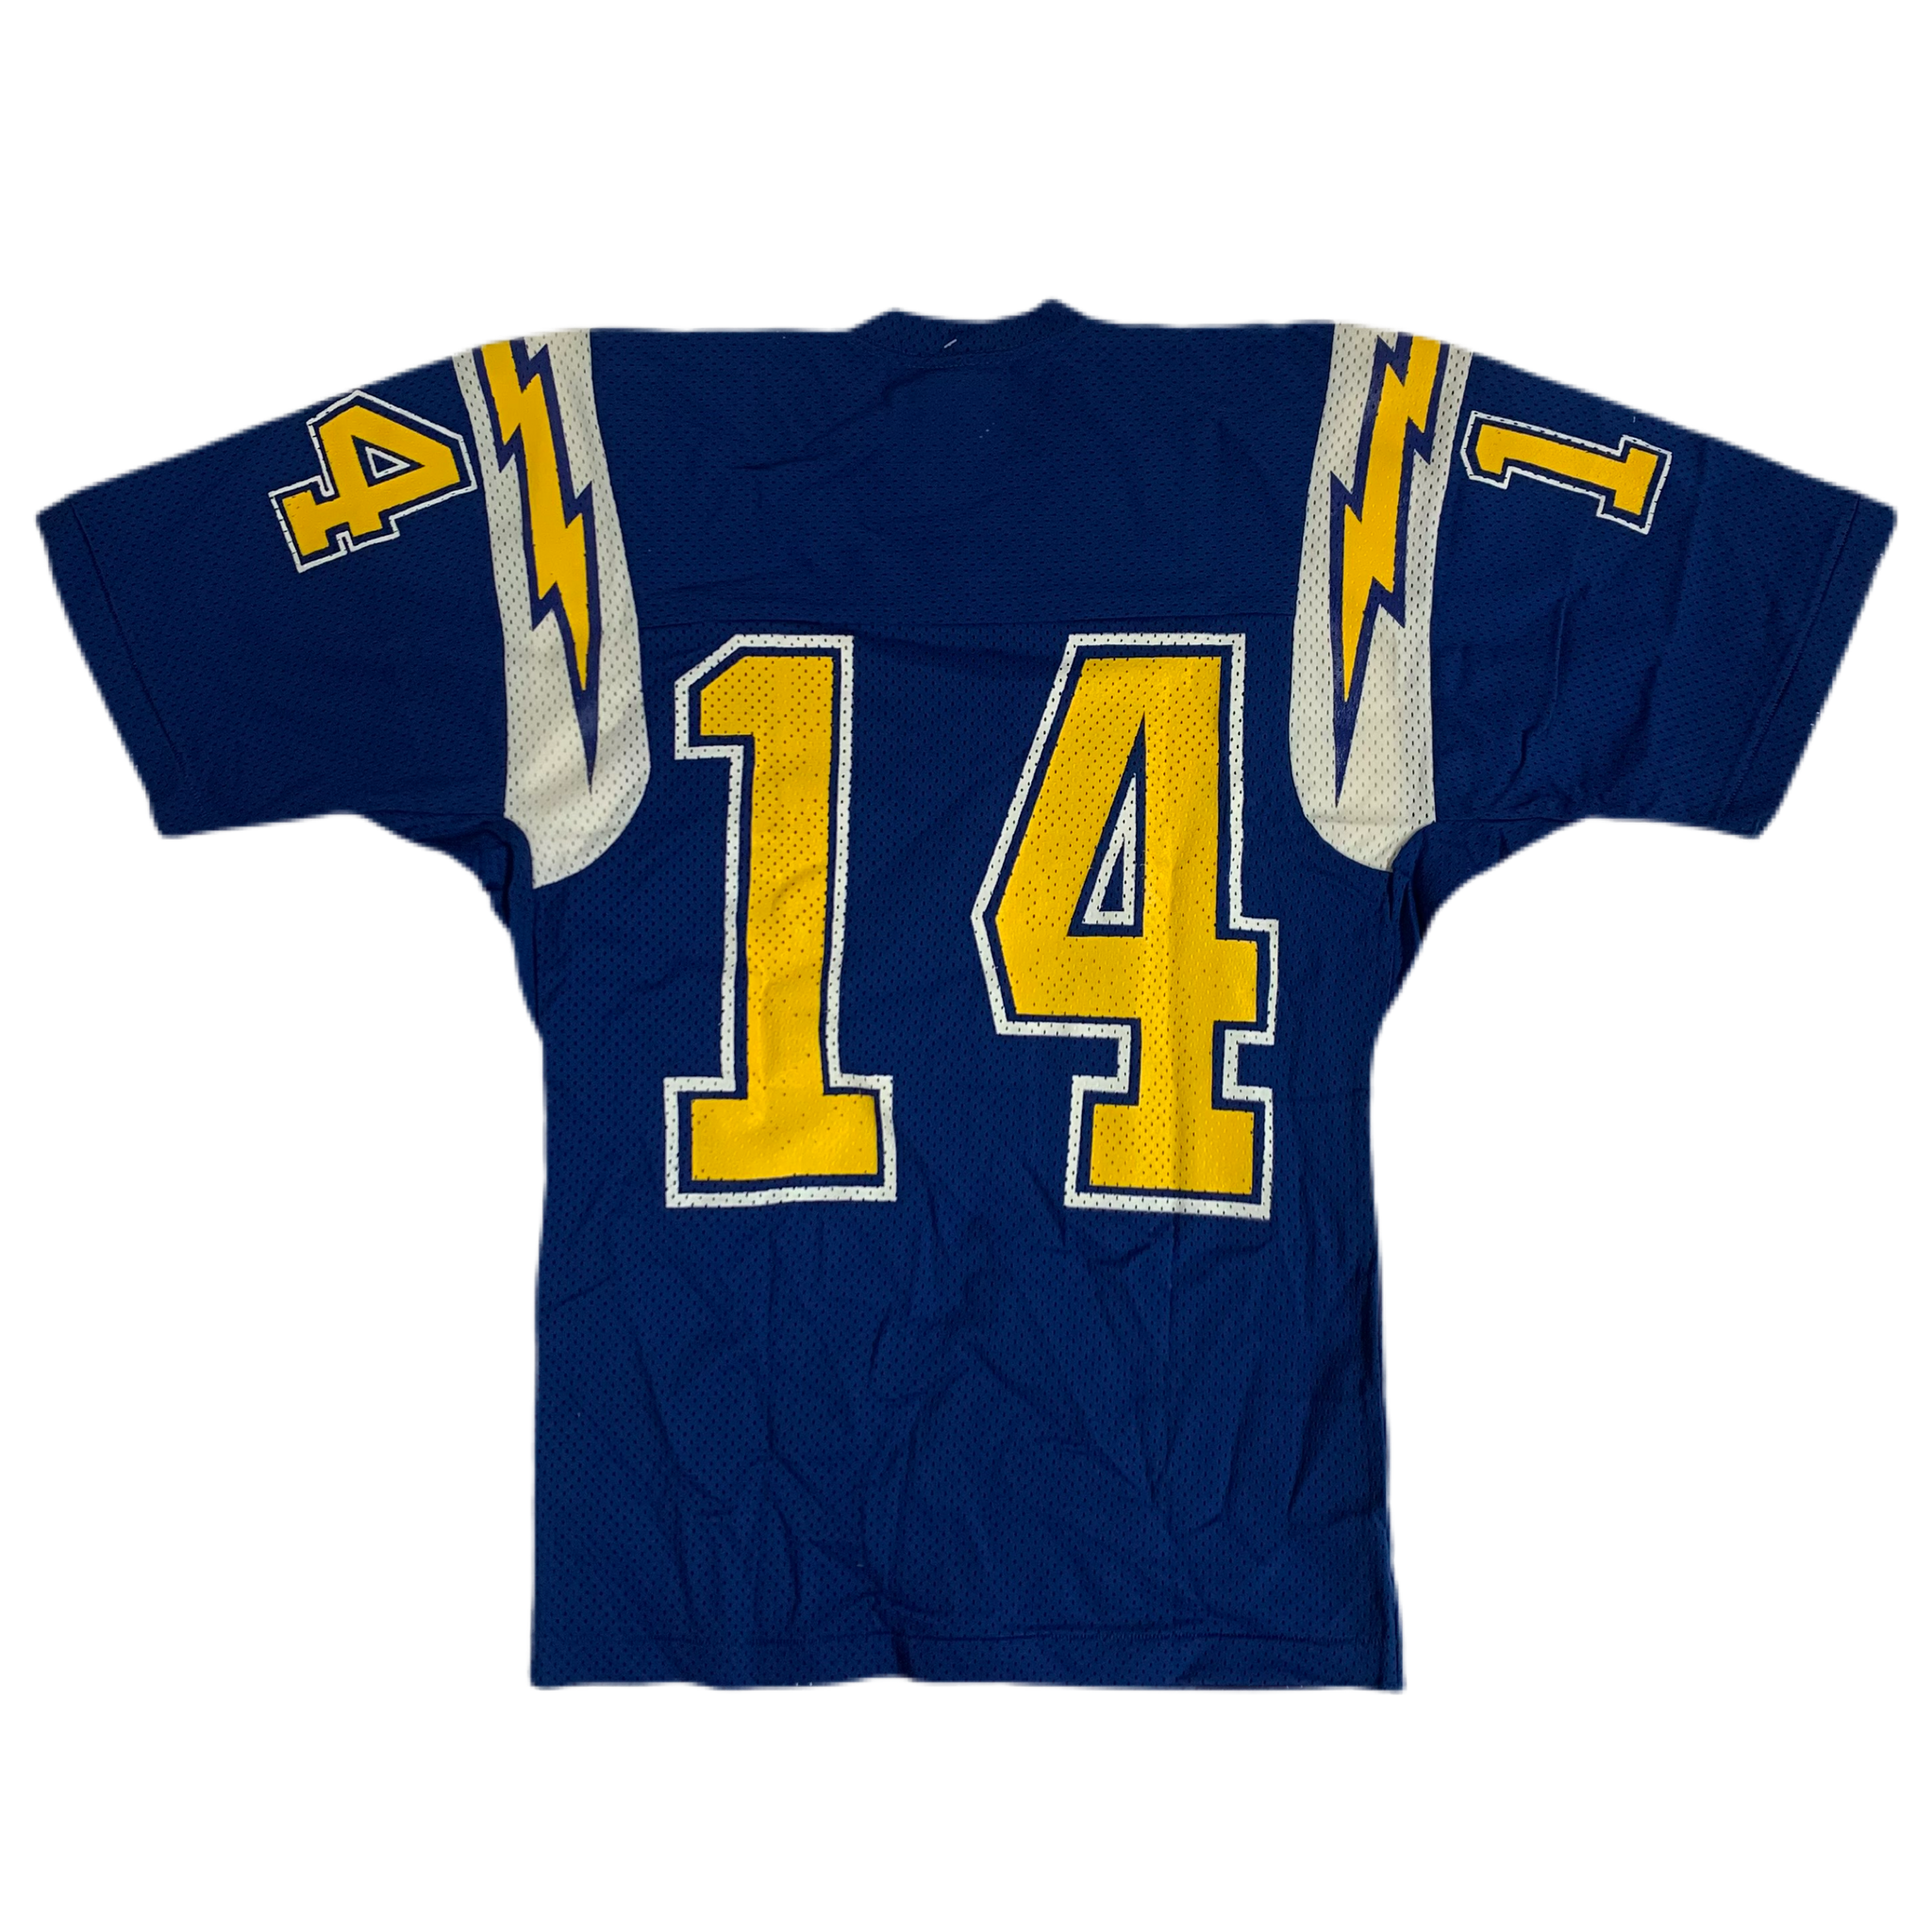 ❌SOLD❌ Bhawoh Jue pro cut throwback San Diego Chargers jersey